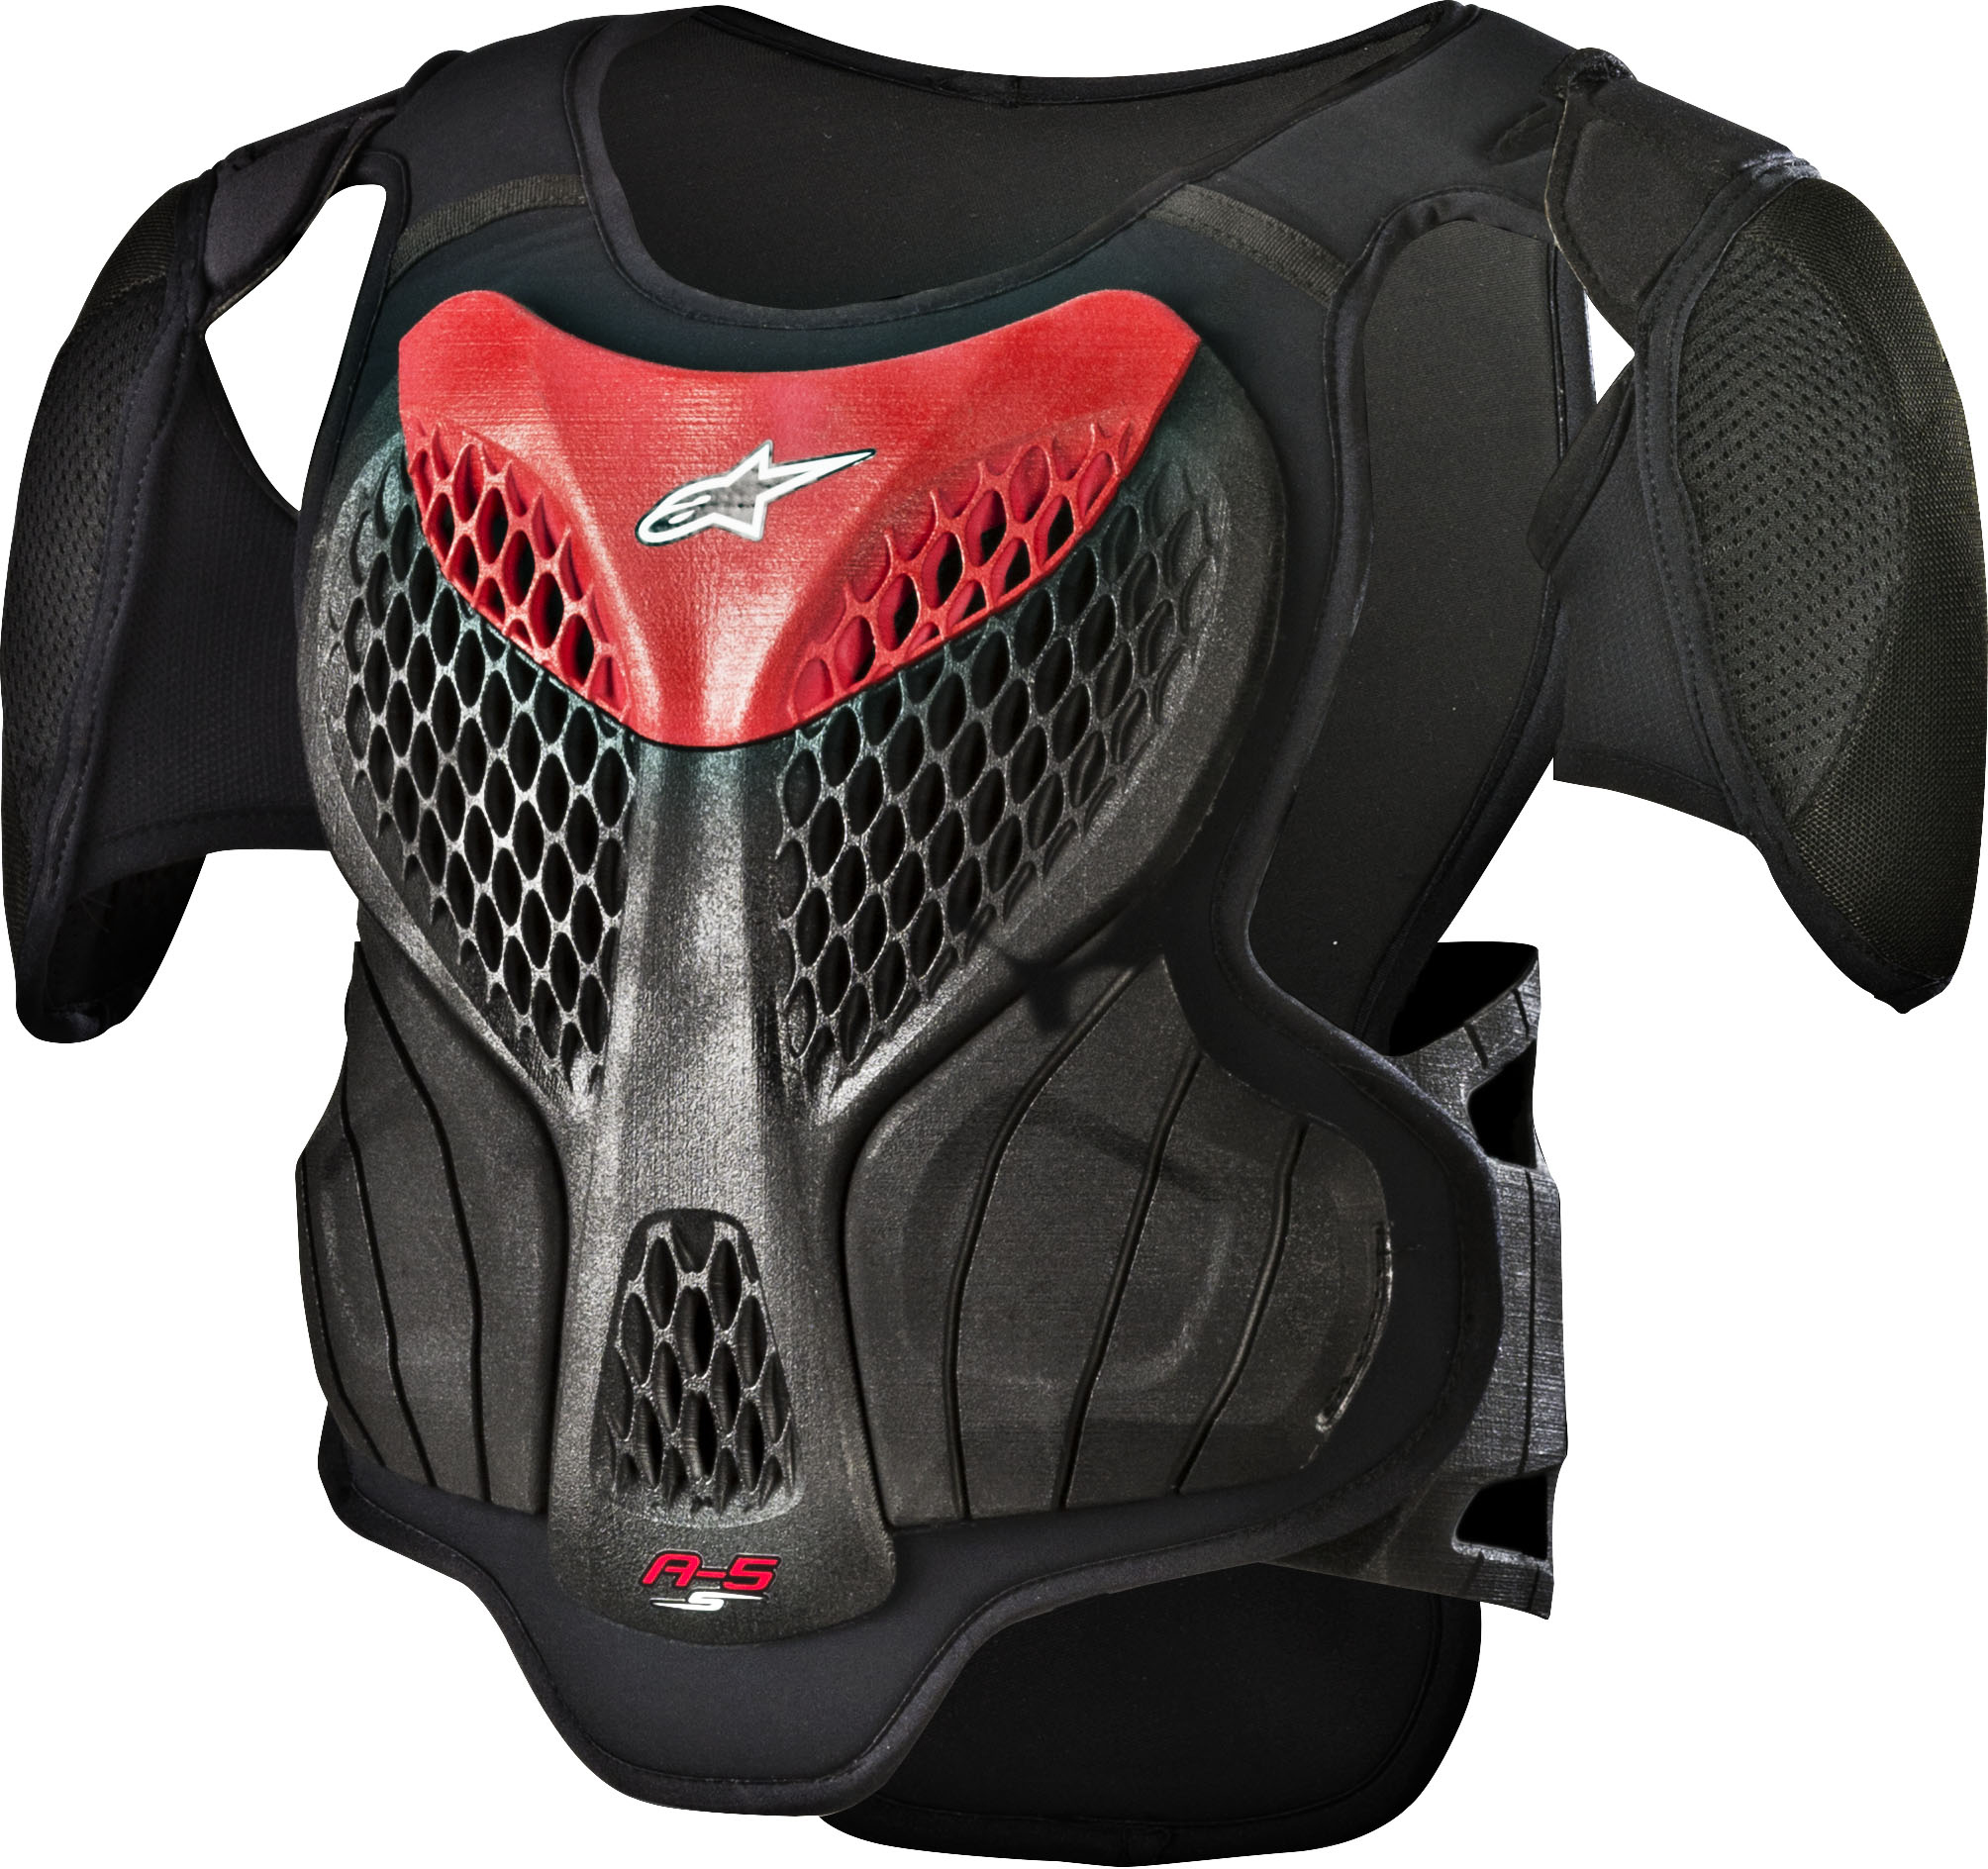 A-5 S Youth Body Armor Black/Red Size Y-S/Y-M - Click Image to Close